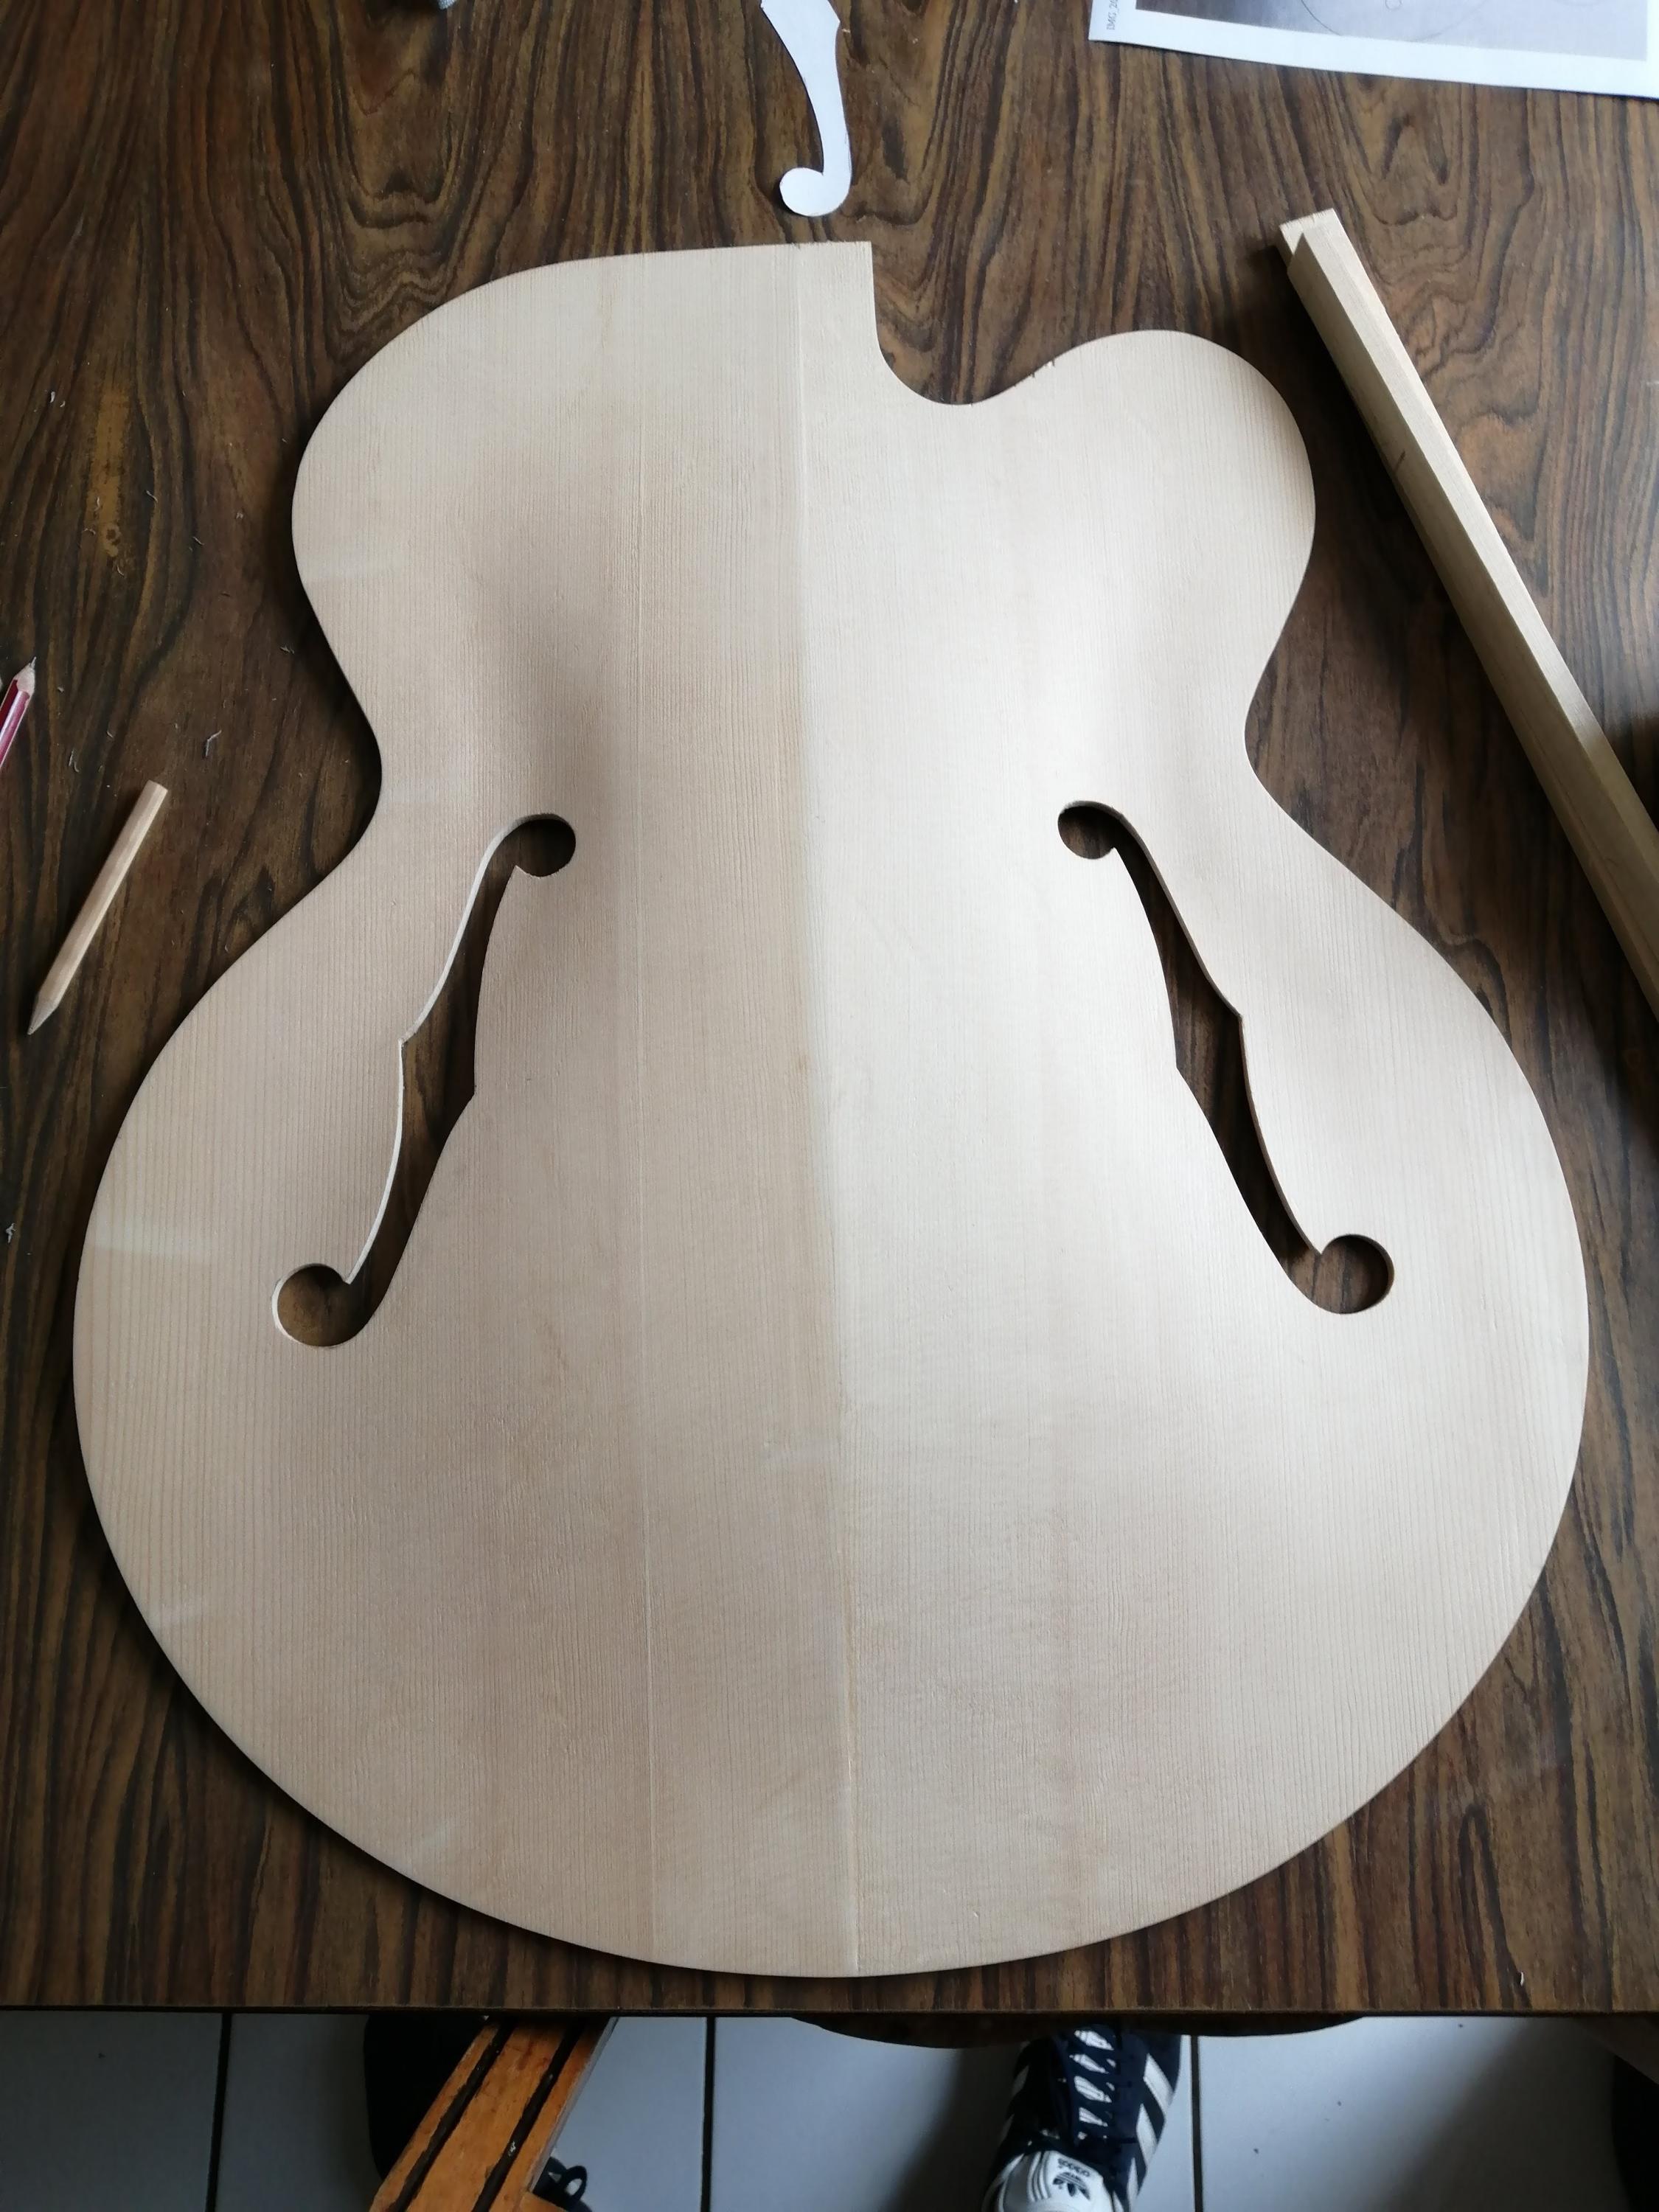 My first archtop (new project)-img_20210713_184750-jpg